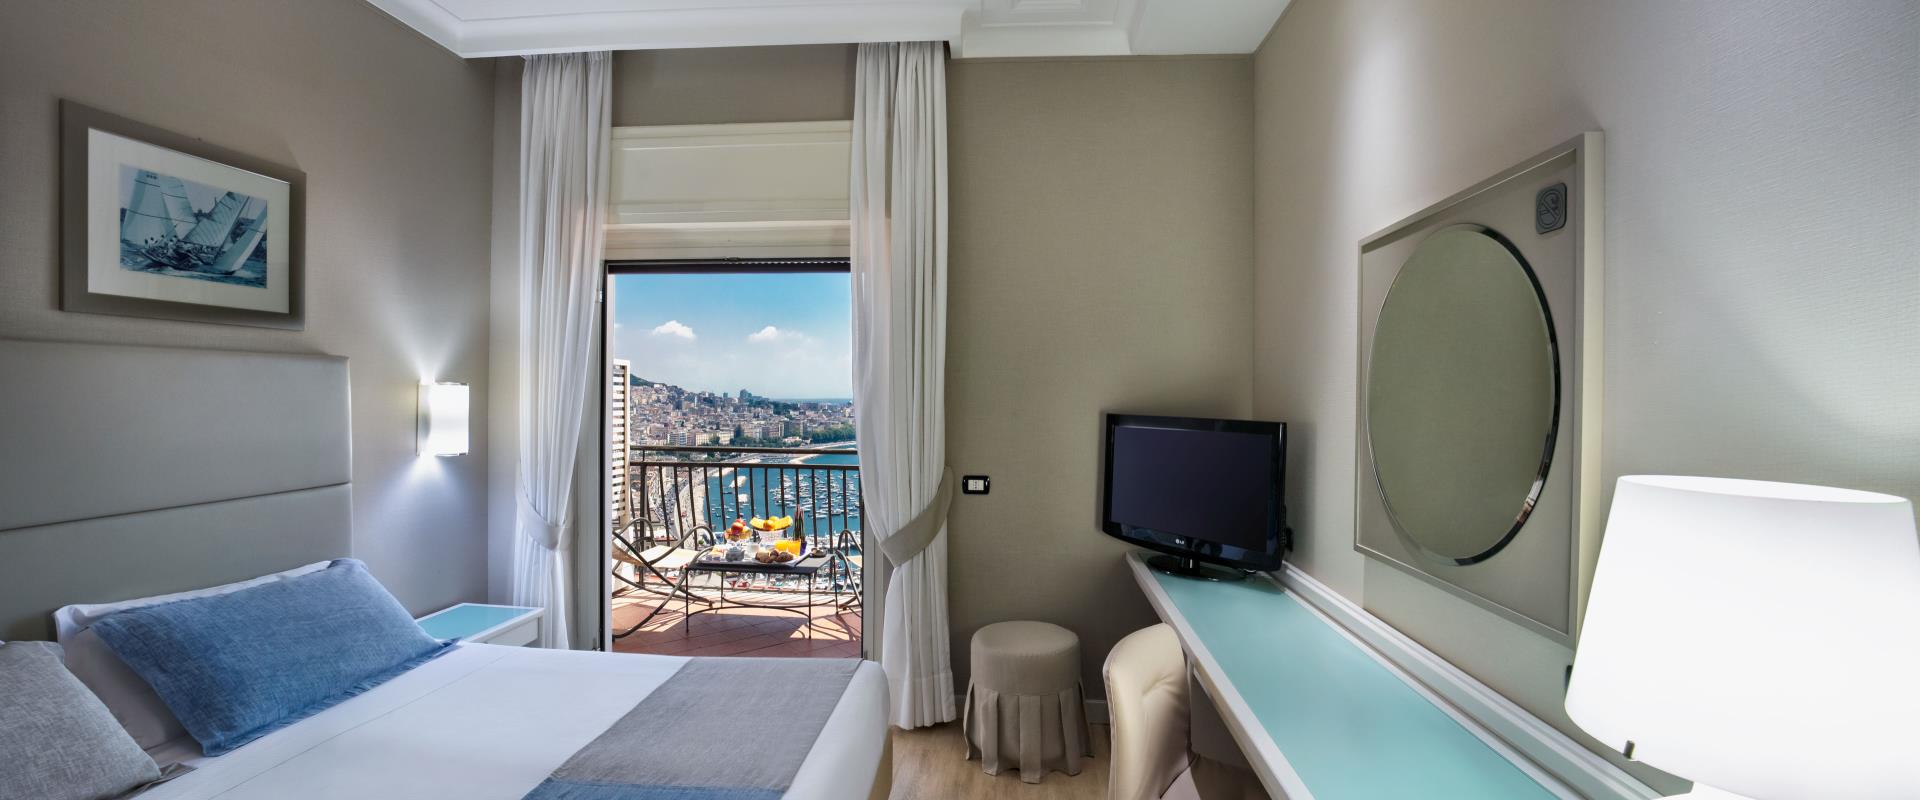 The Superior Sea View rooms of the BW Signature Collection Hotel Paradiso are precious rooms directly overlooking the Gulf of Naples that allow you to enjoy this magnificent panorama from an exclusive position.